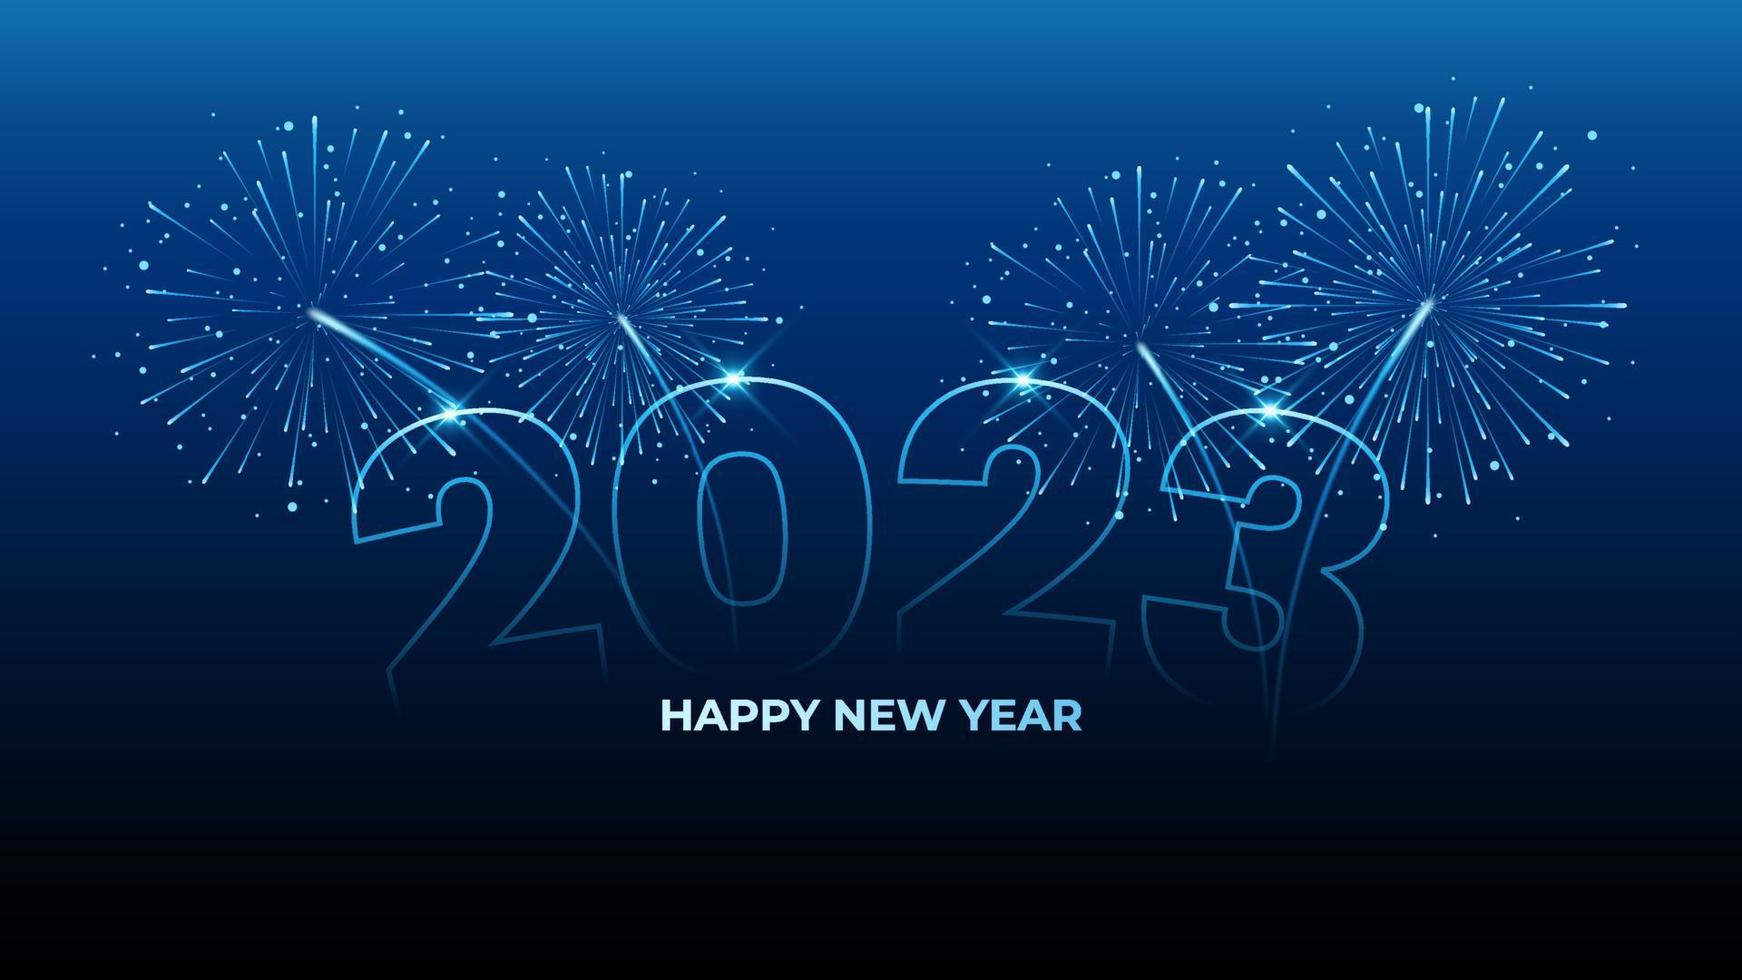 Happy new year 2023 line design with fireworks background vector